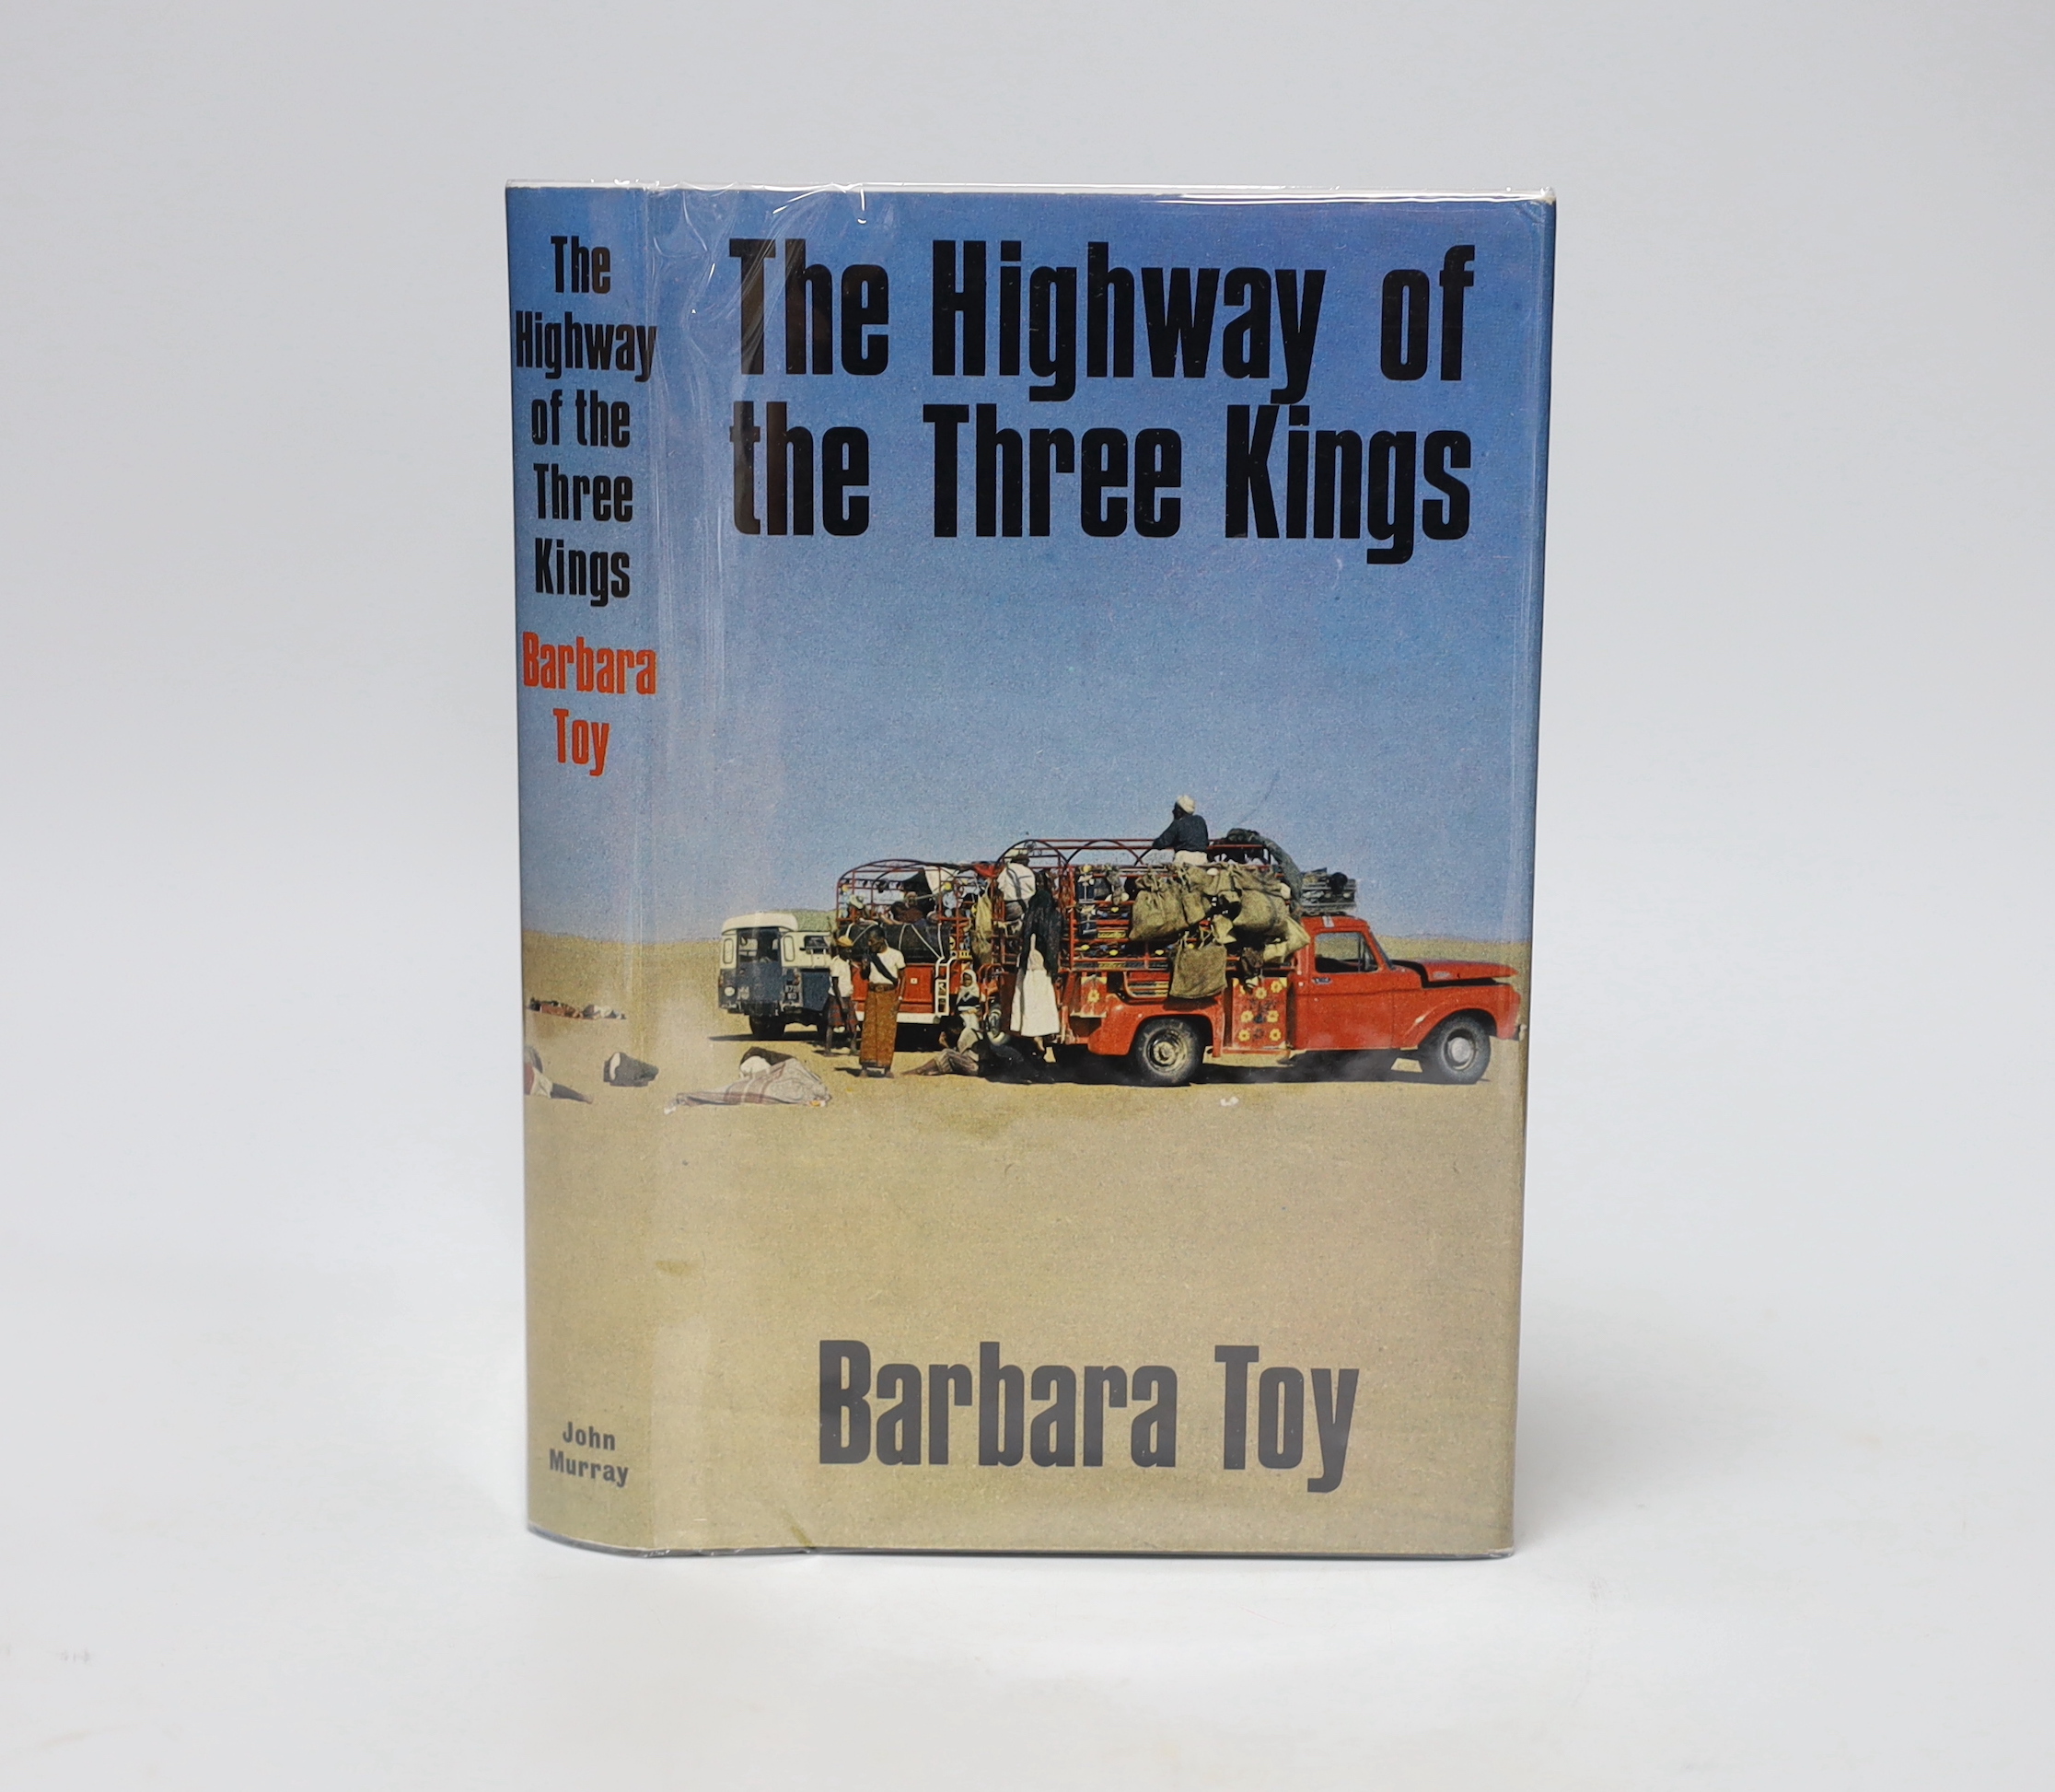 Toy, Barbara - The Highway of the Three Kings, 1st edition, 8vo, blue cloth, in illustrated price-clipped d/j, with two route maps (one double page), John Murray, London, 1968.